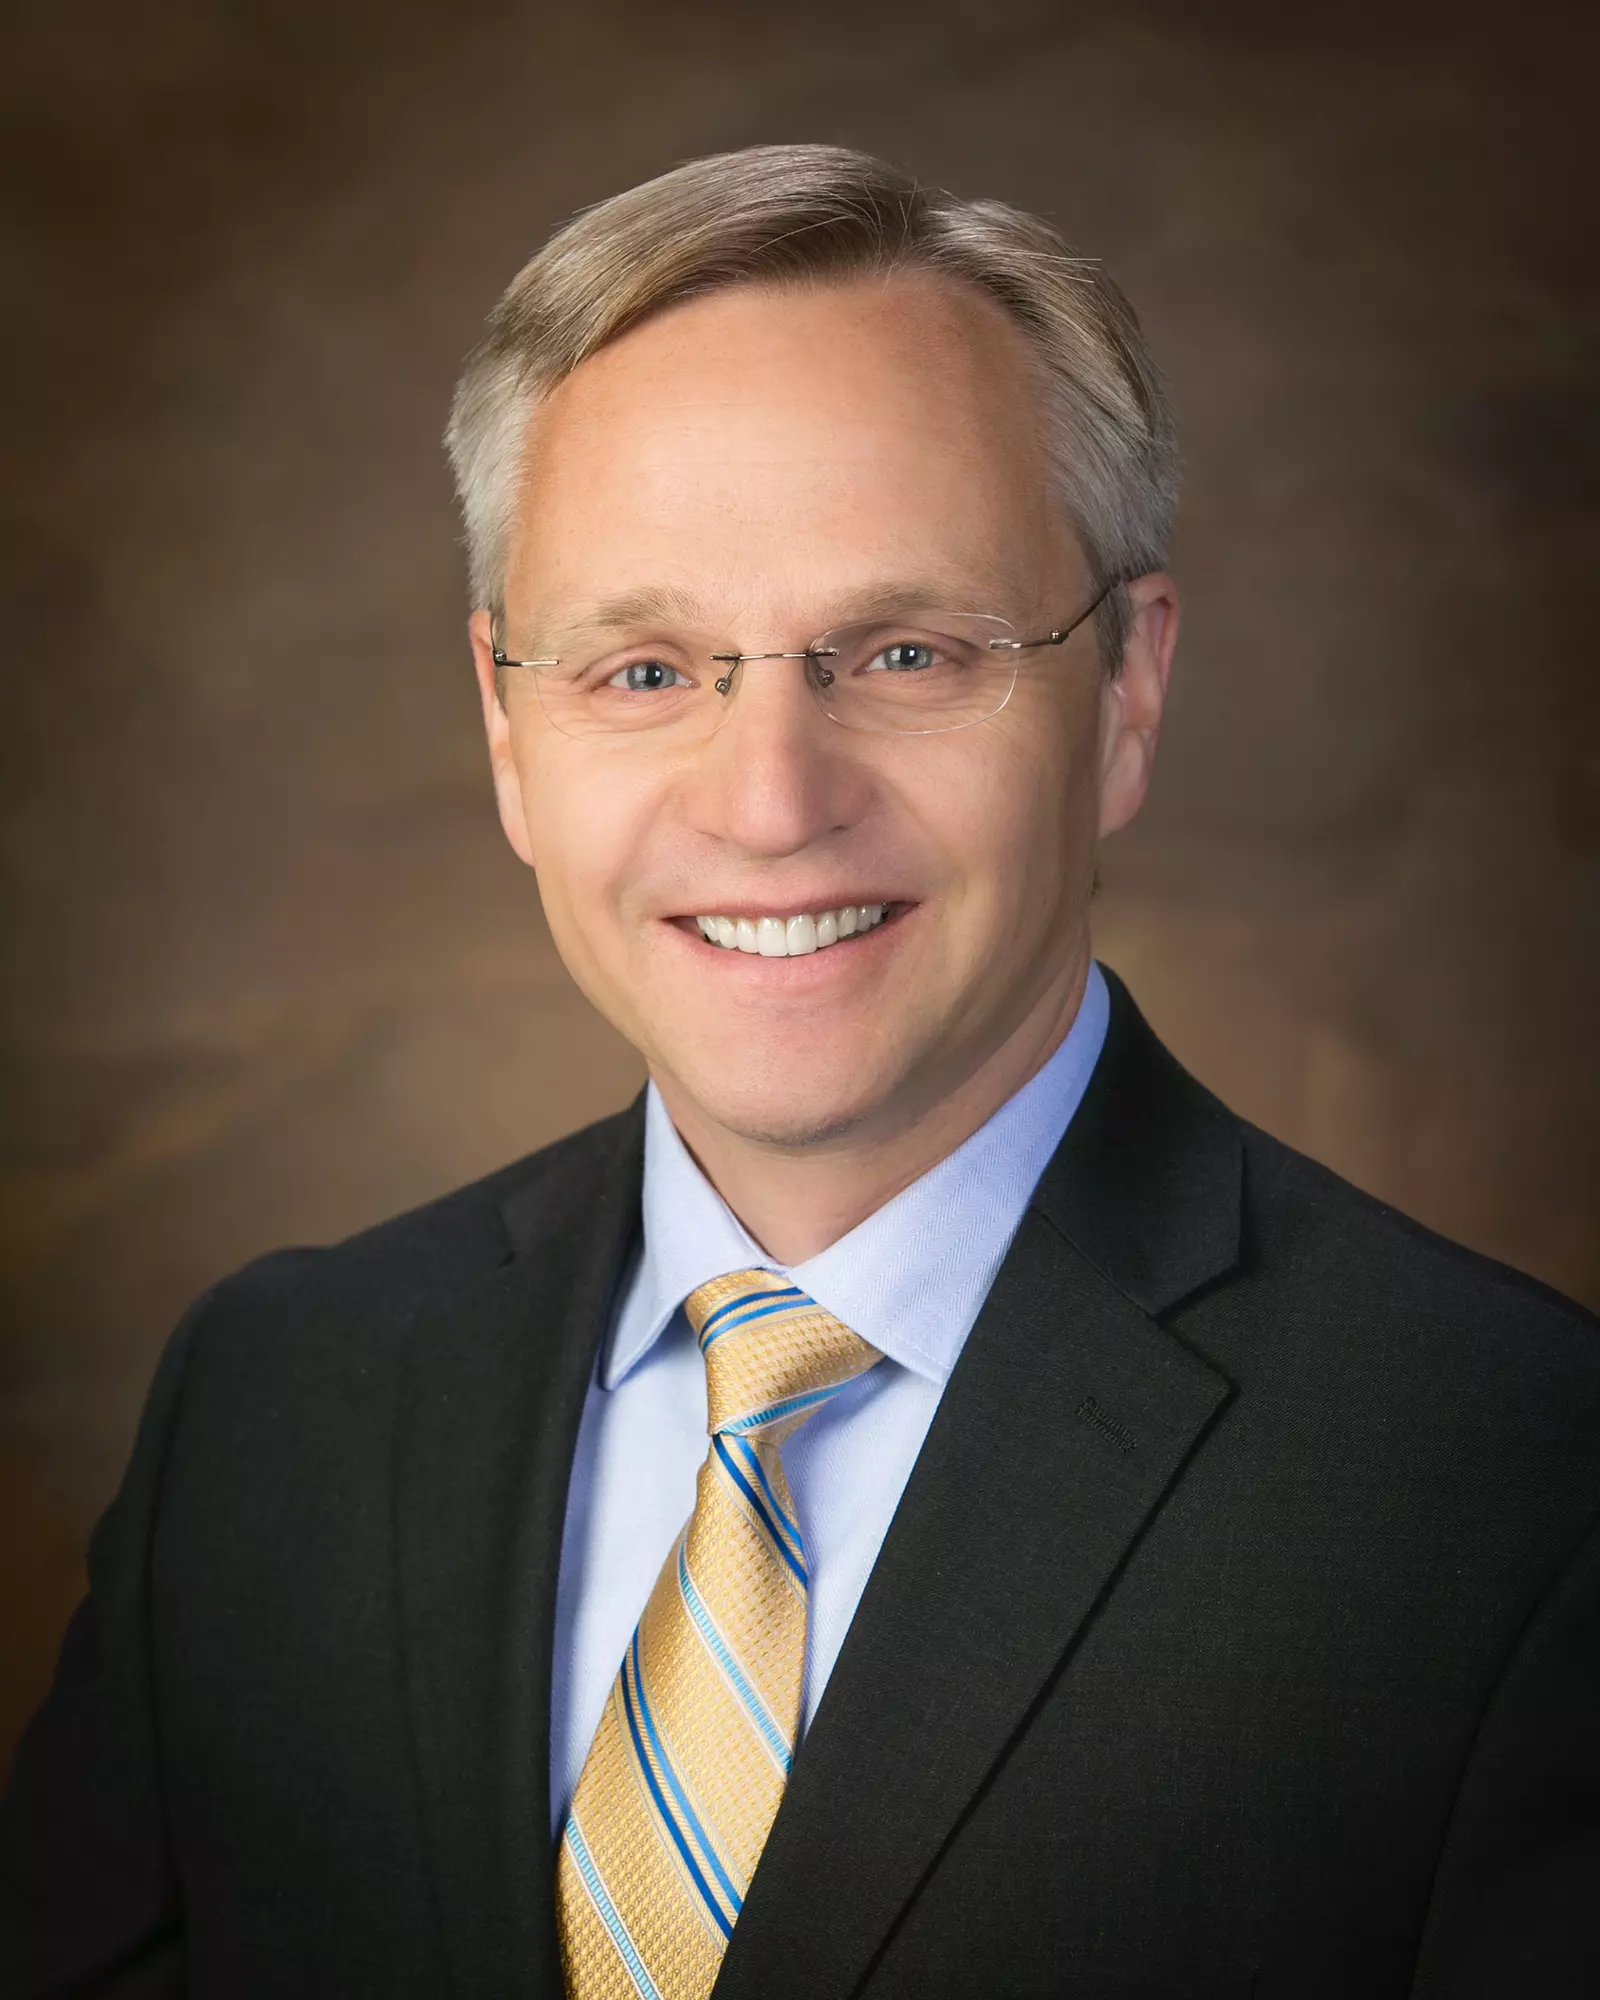 Dr. Verrill joins AdventHealth’s Mid-America Region and will assume leadership in mid-October.